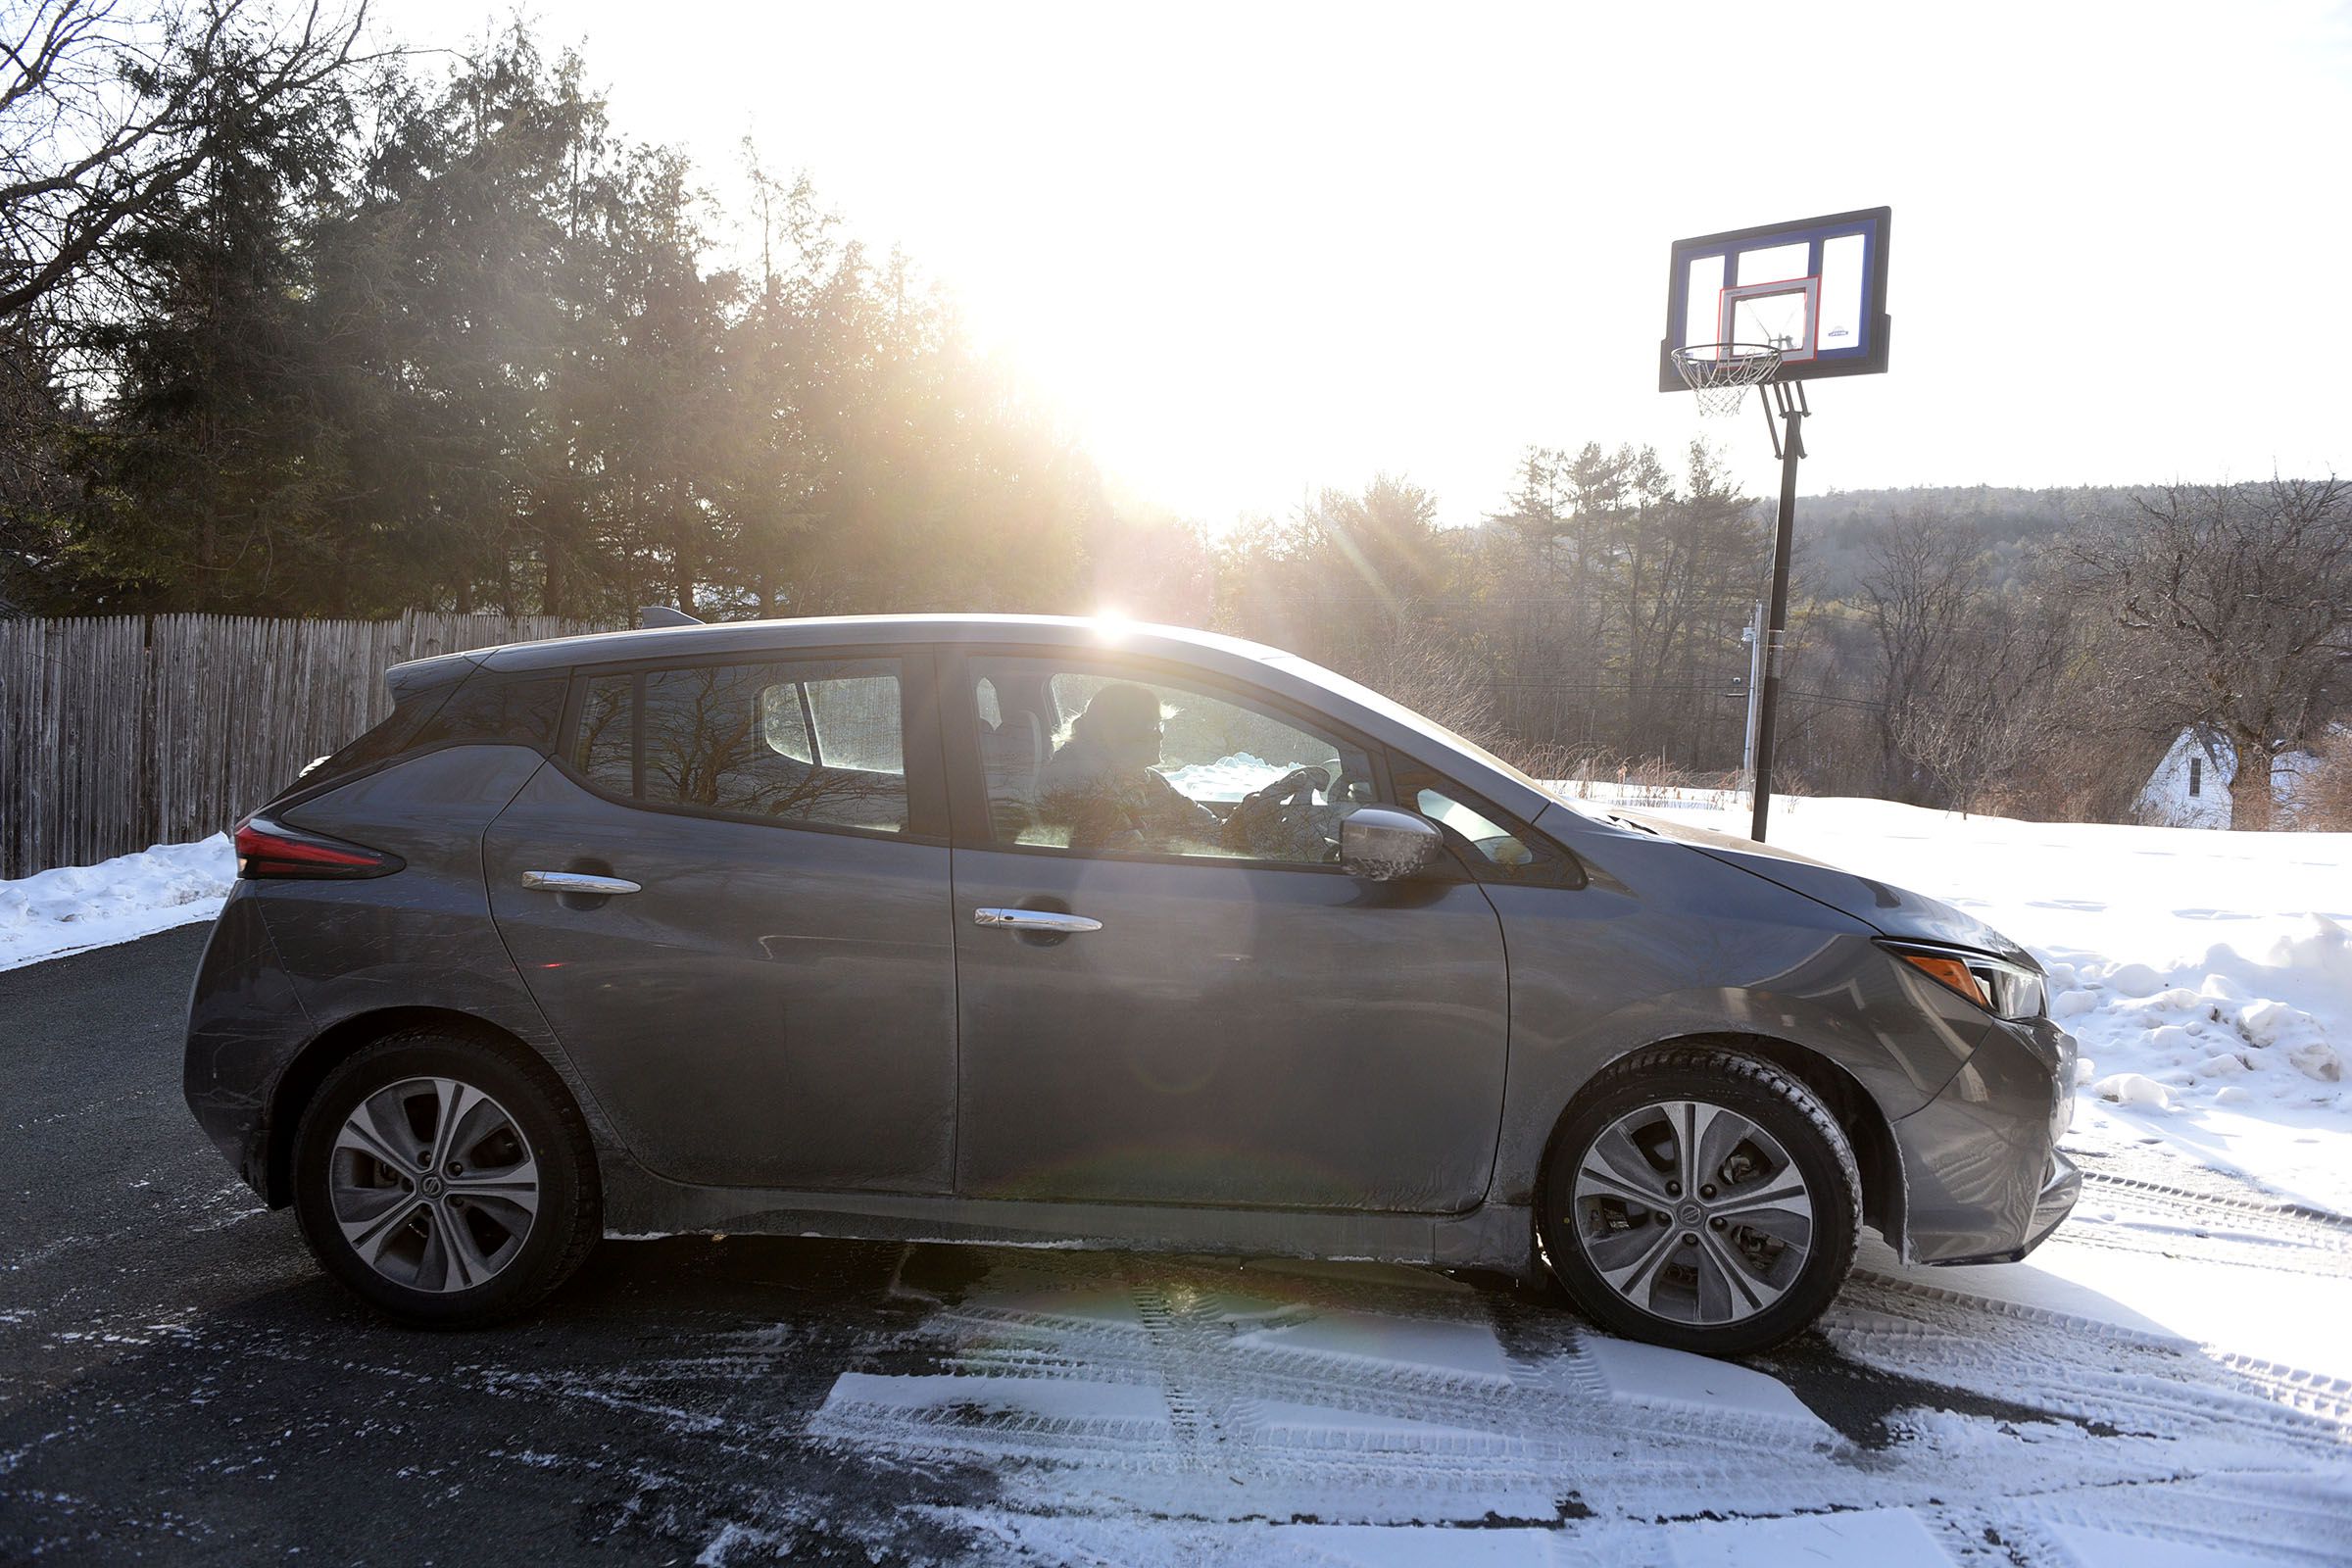 Julie Davis, of Lyme, N.H., heads for work in her new electric car on Wednesday, Feb. 3, 2021. ( Valley News - Jennifer Hauck) Copyright Valley News. May not be reprinted or used online without permission. Send requests to permission@vnews.com.